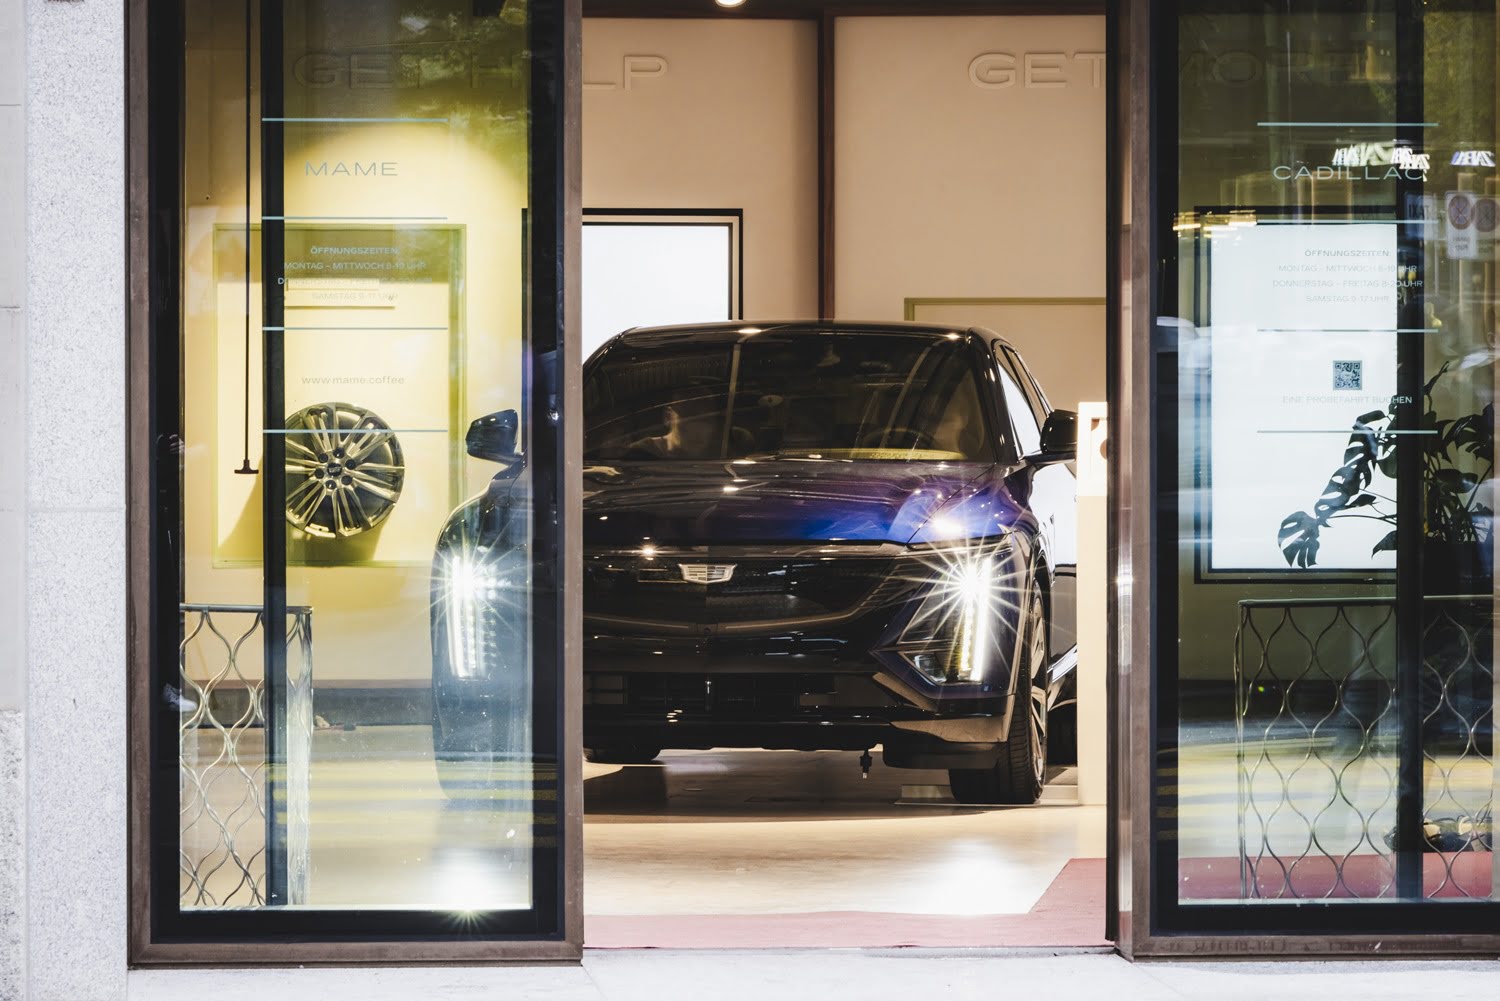 Brand-New Cadillac City Experience Center Debuts In Zurich